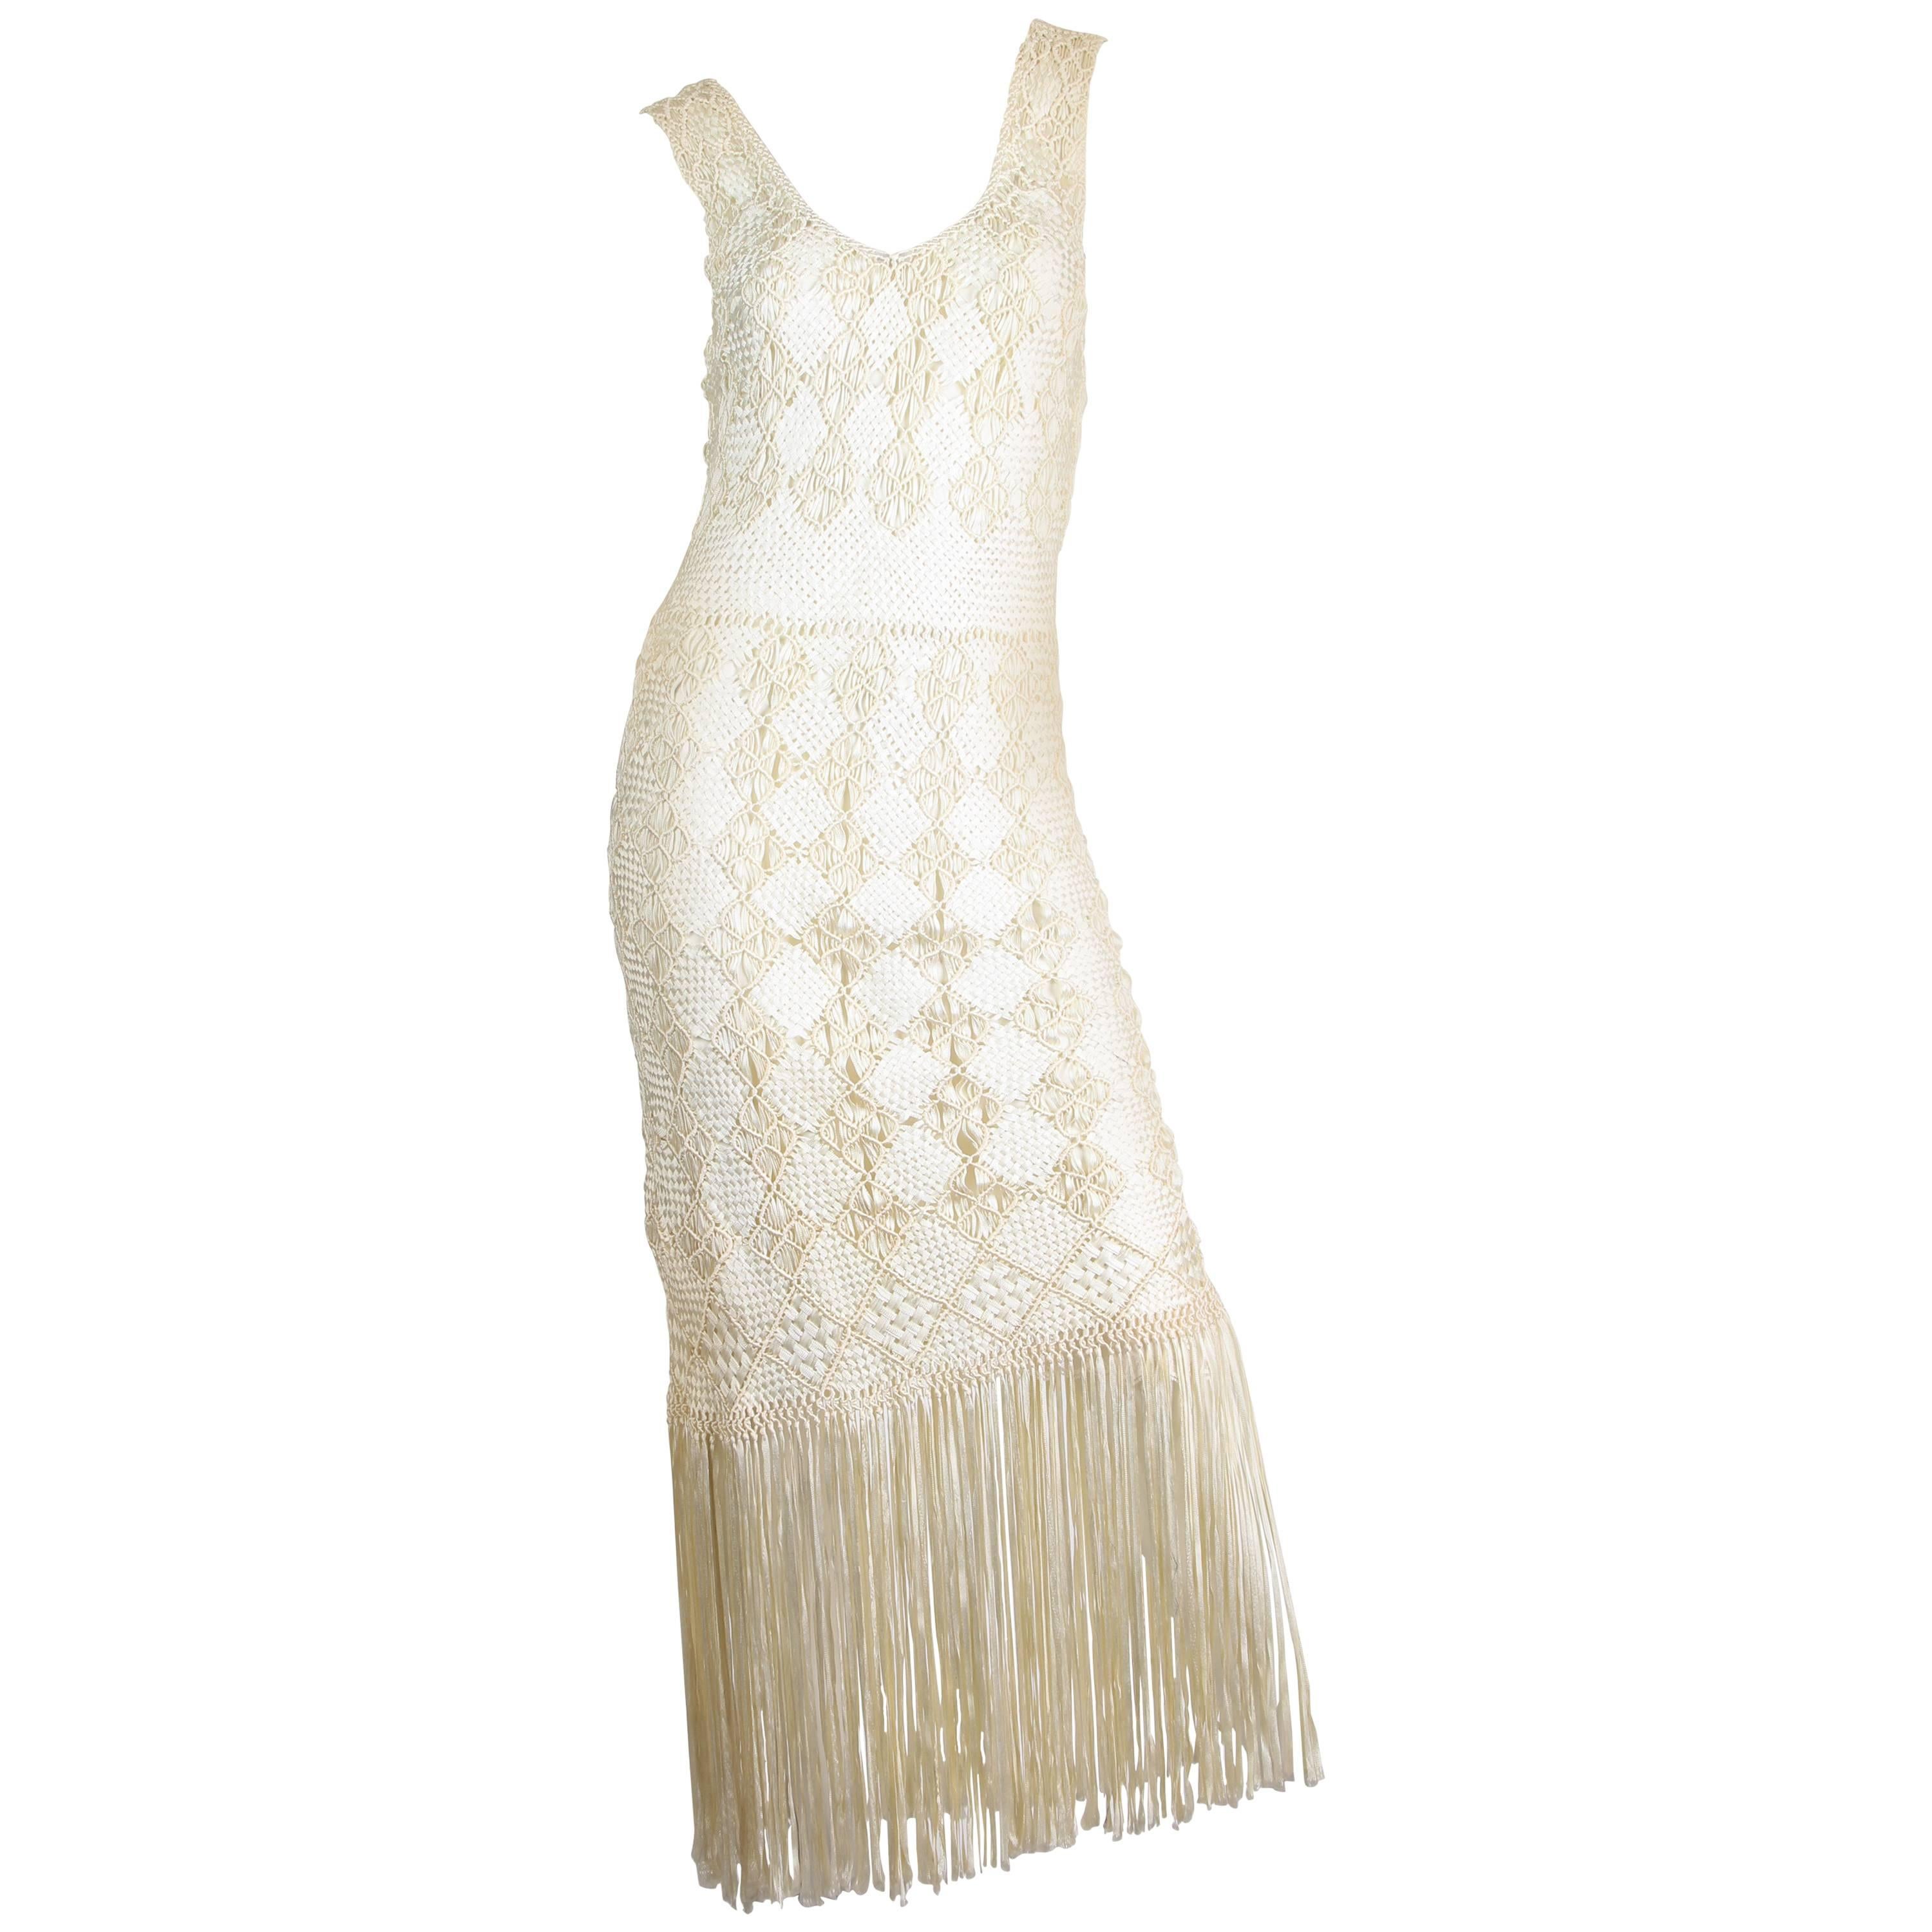 1970s Hand Knotted Ribbon Crochet Dress with Fringed Hem